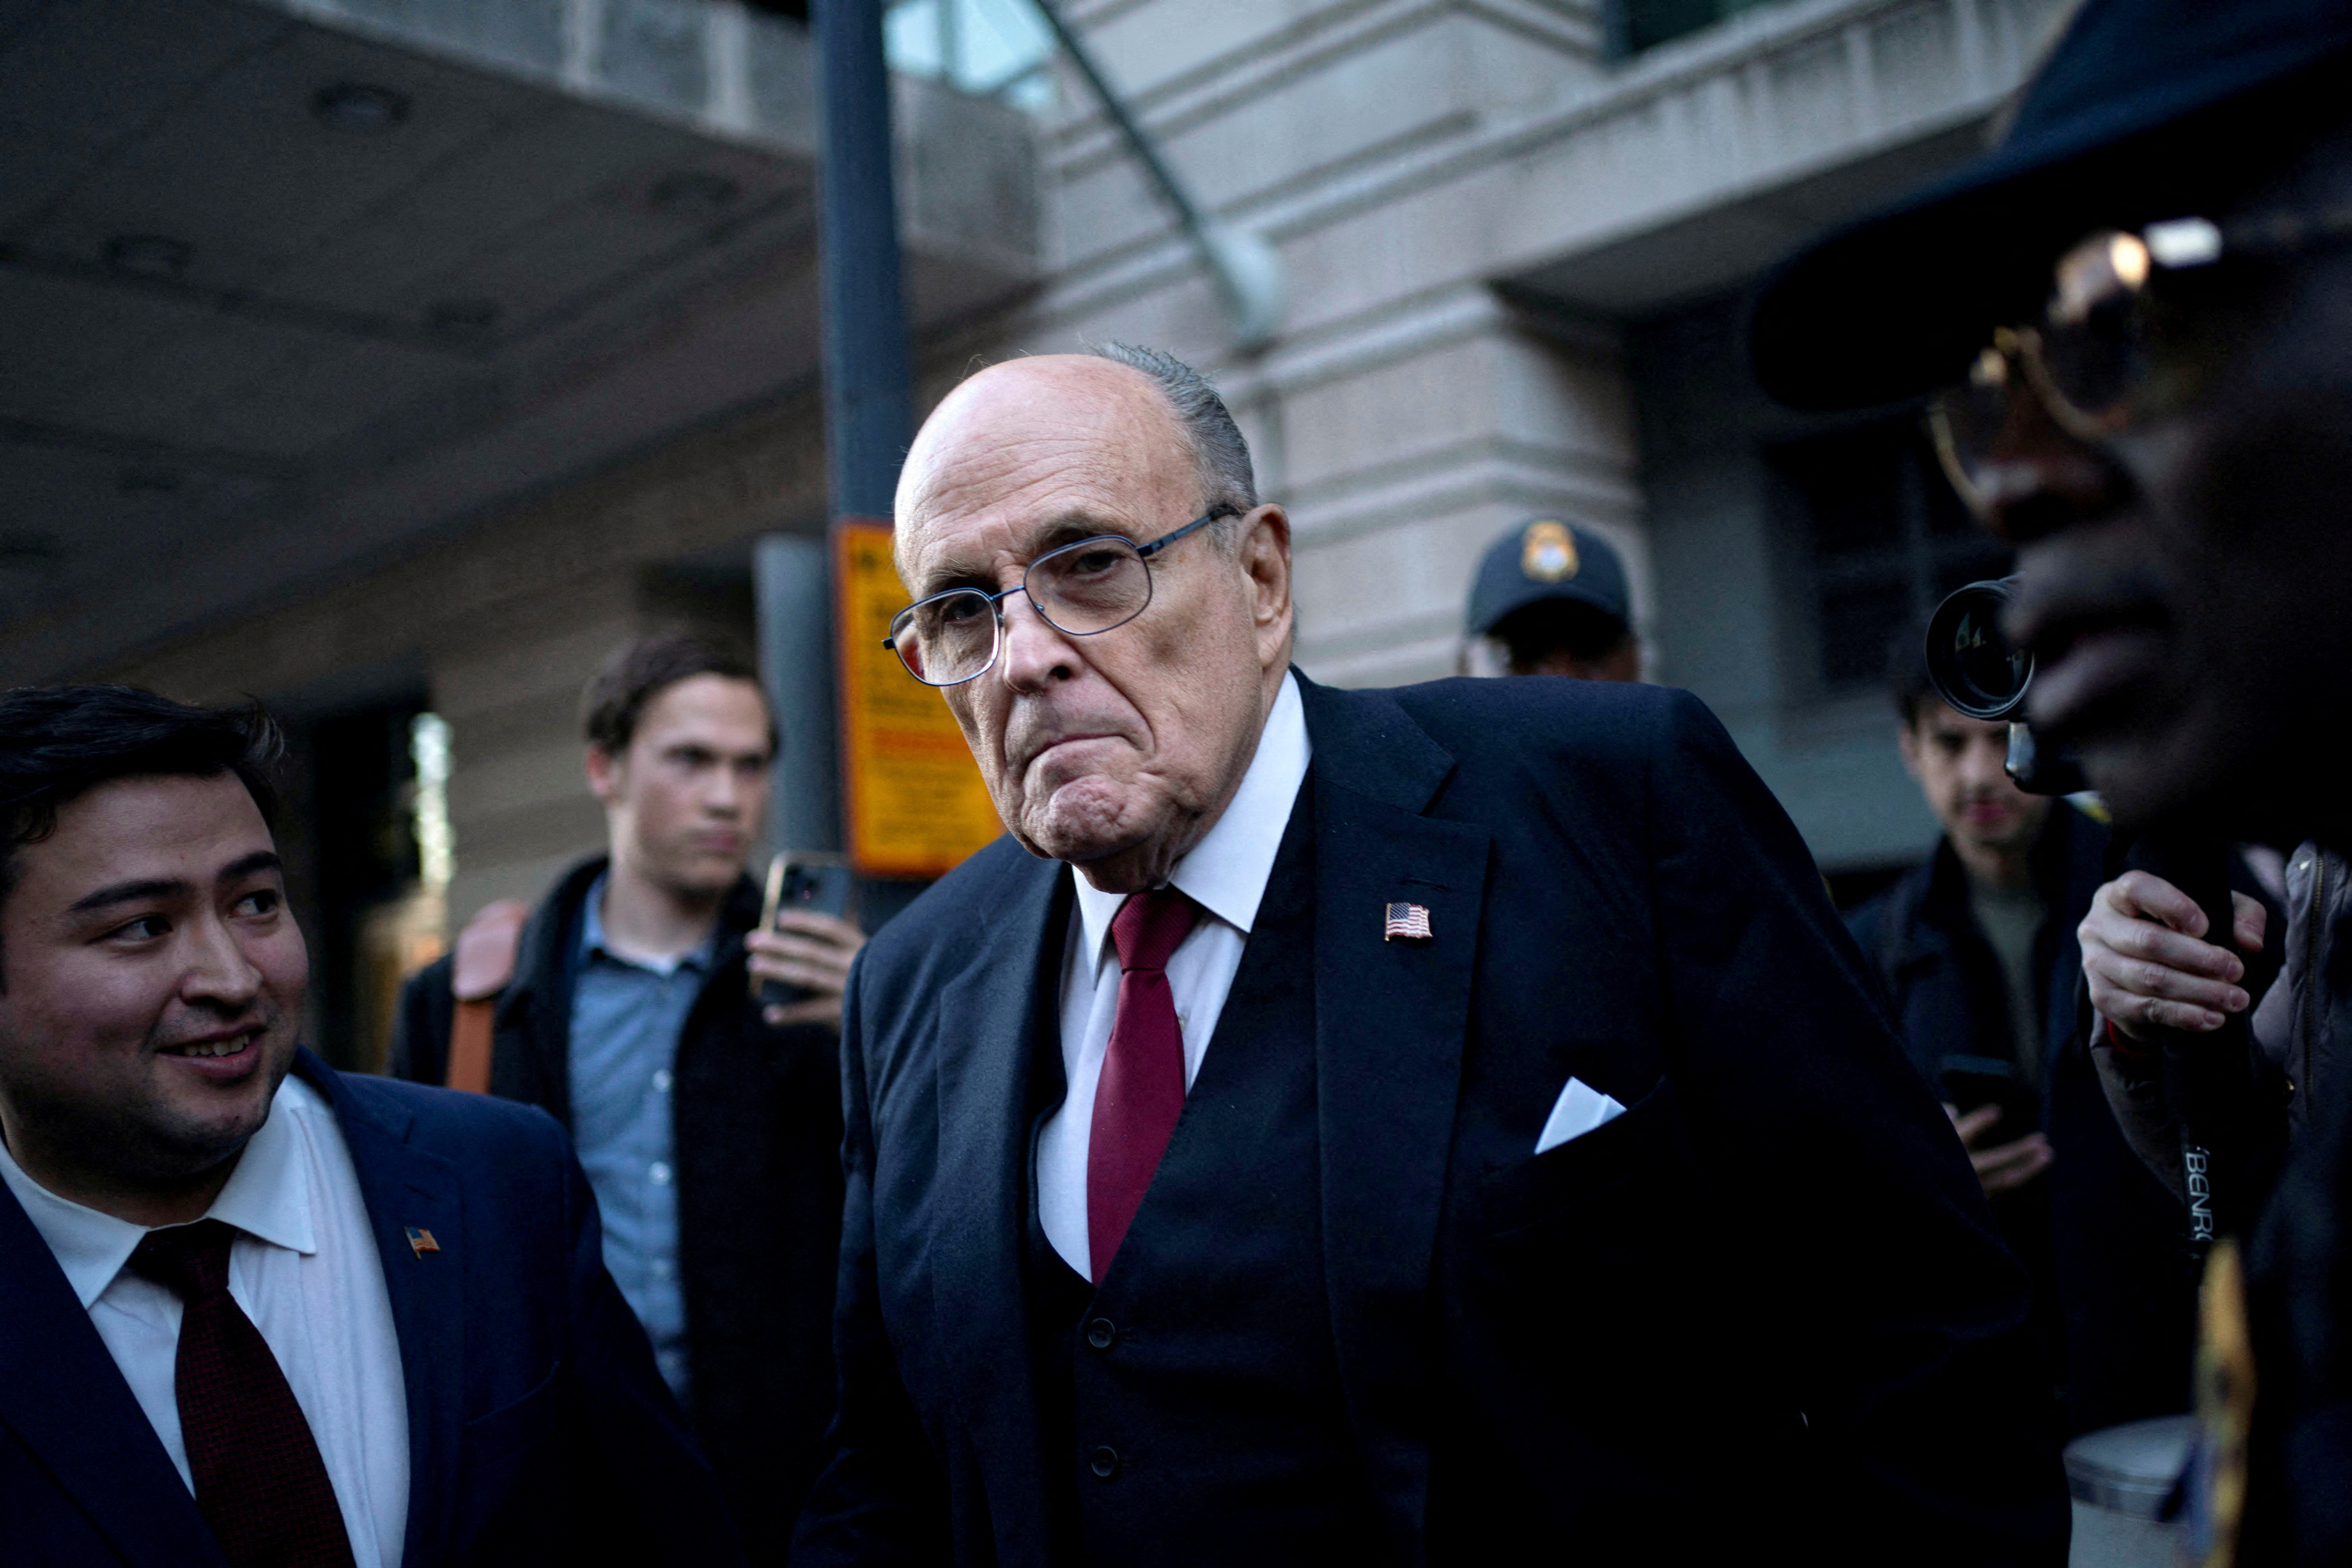 Former New York Mayor Rudy Giuliani departs defamation lawsuit at the District Courthouse in Washington